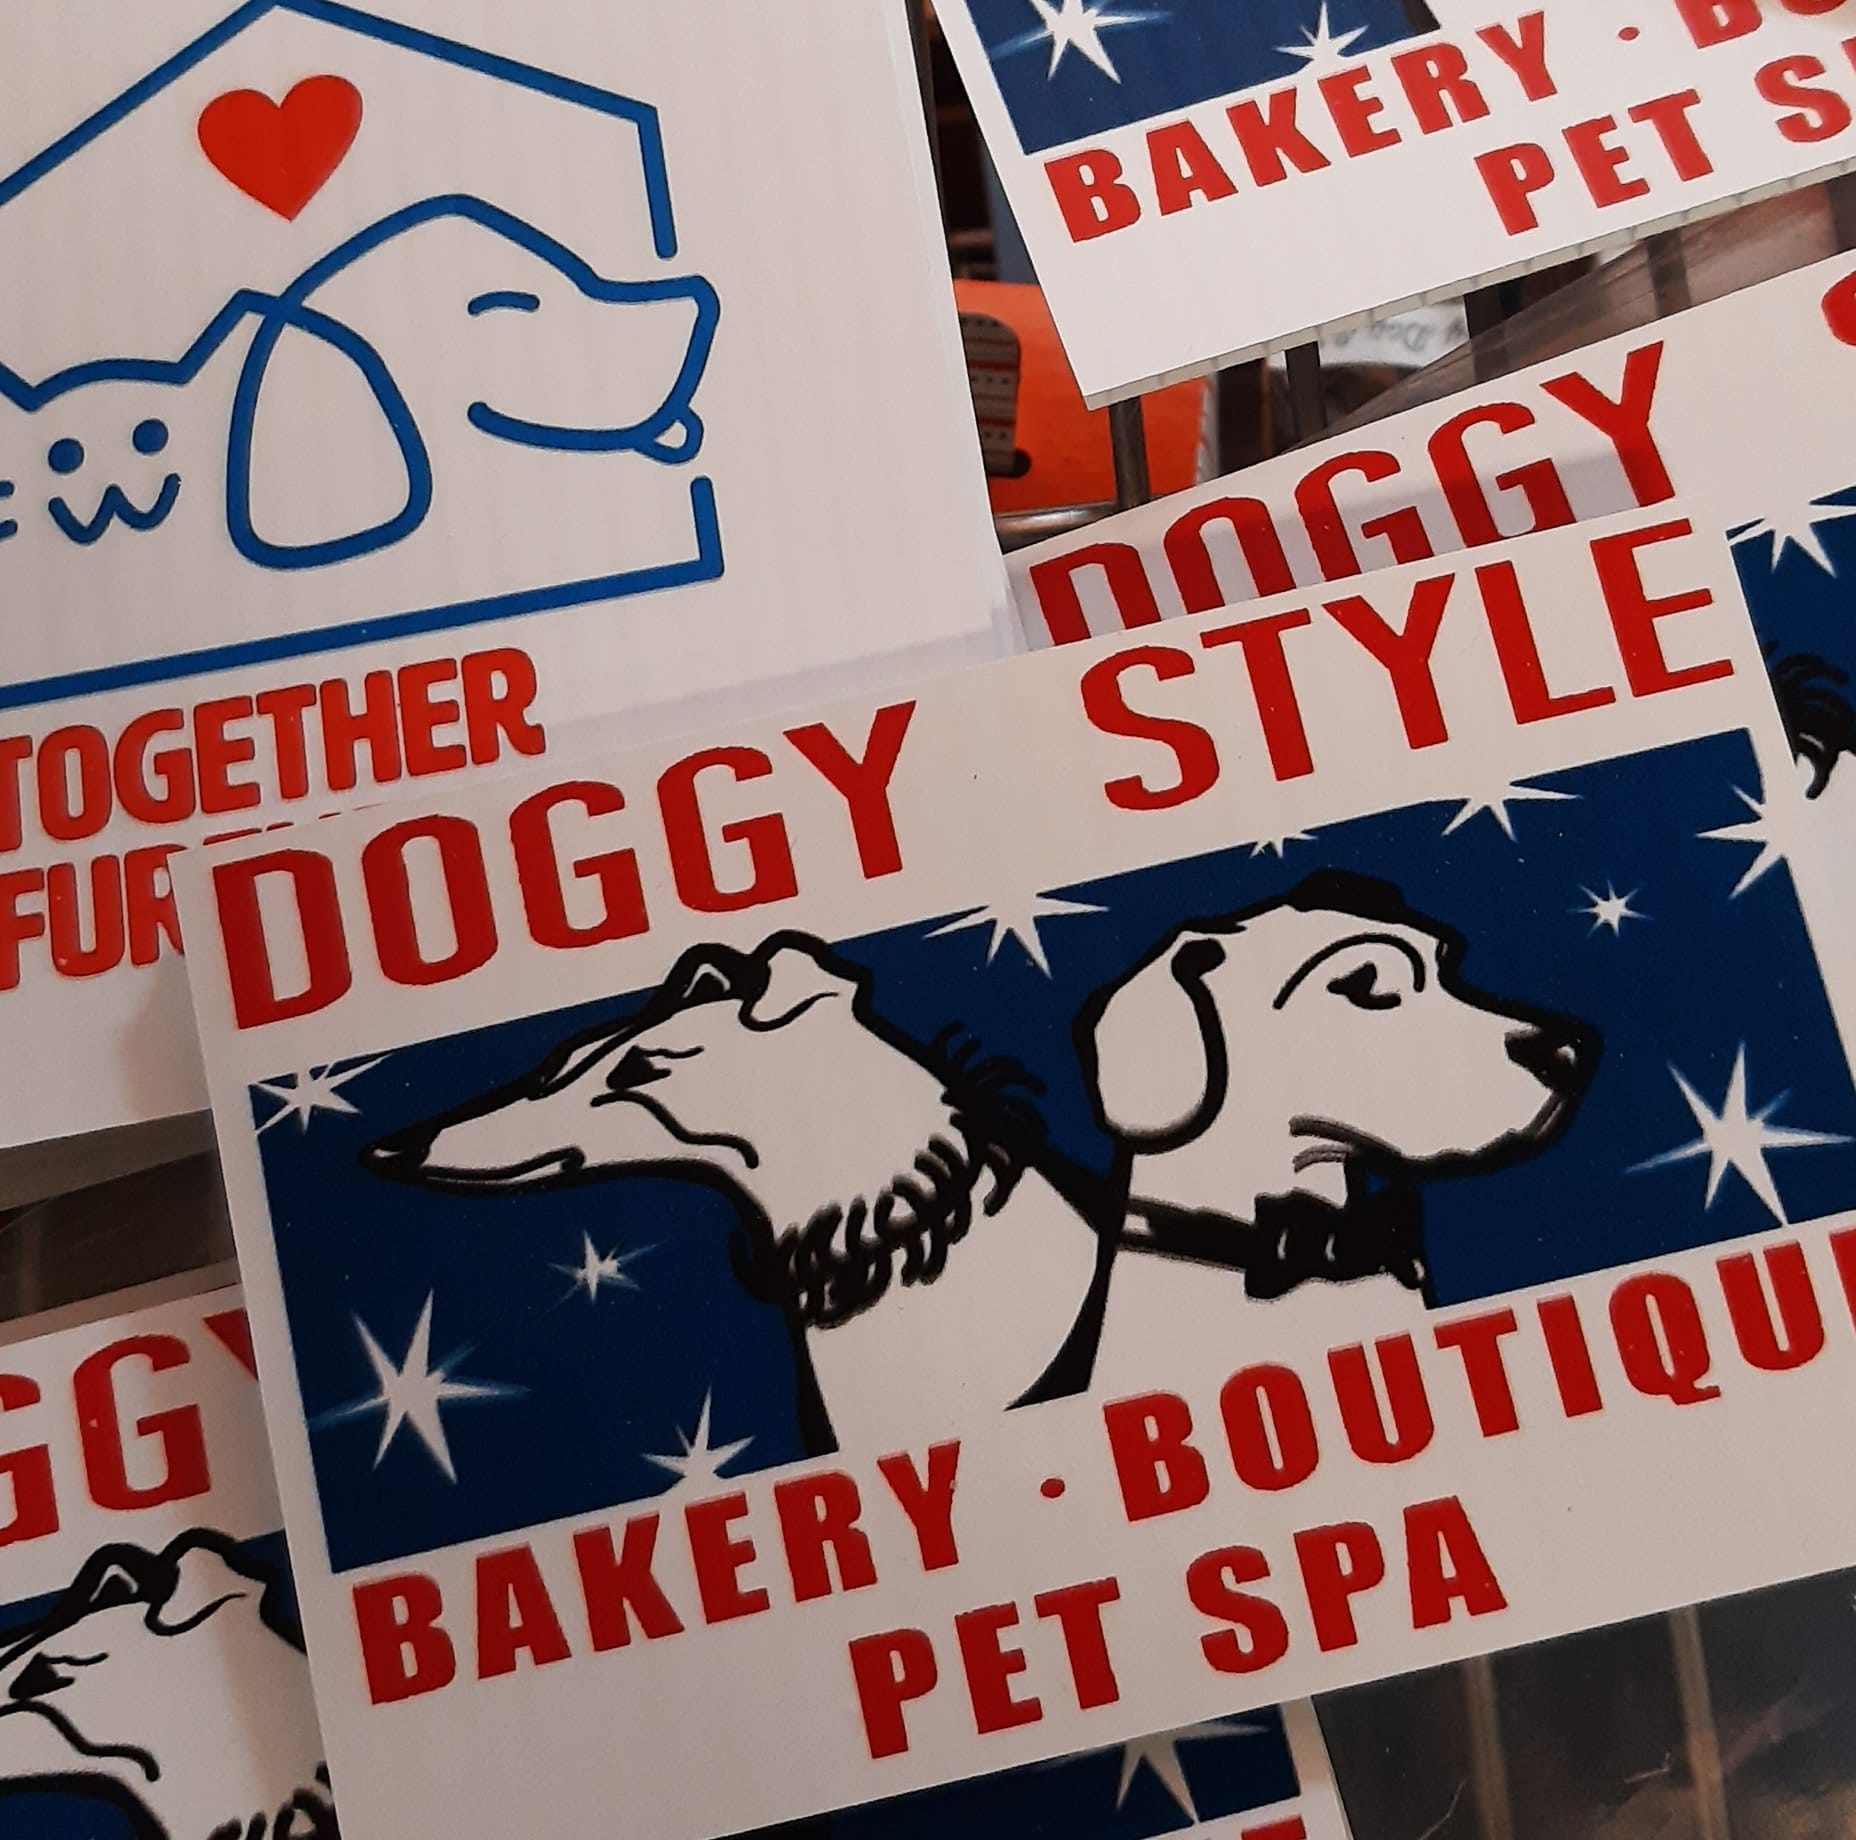 Company logo of Doggy Style Bakery, Boutique & Pet Spa